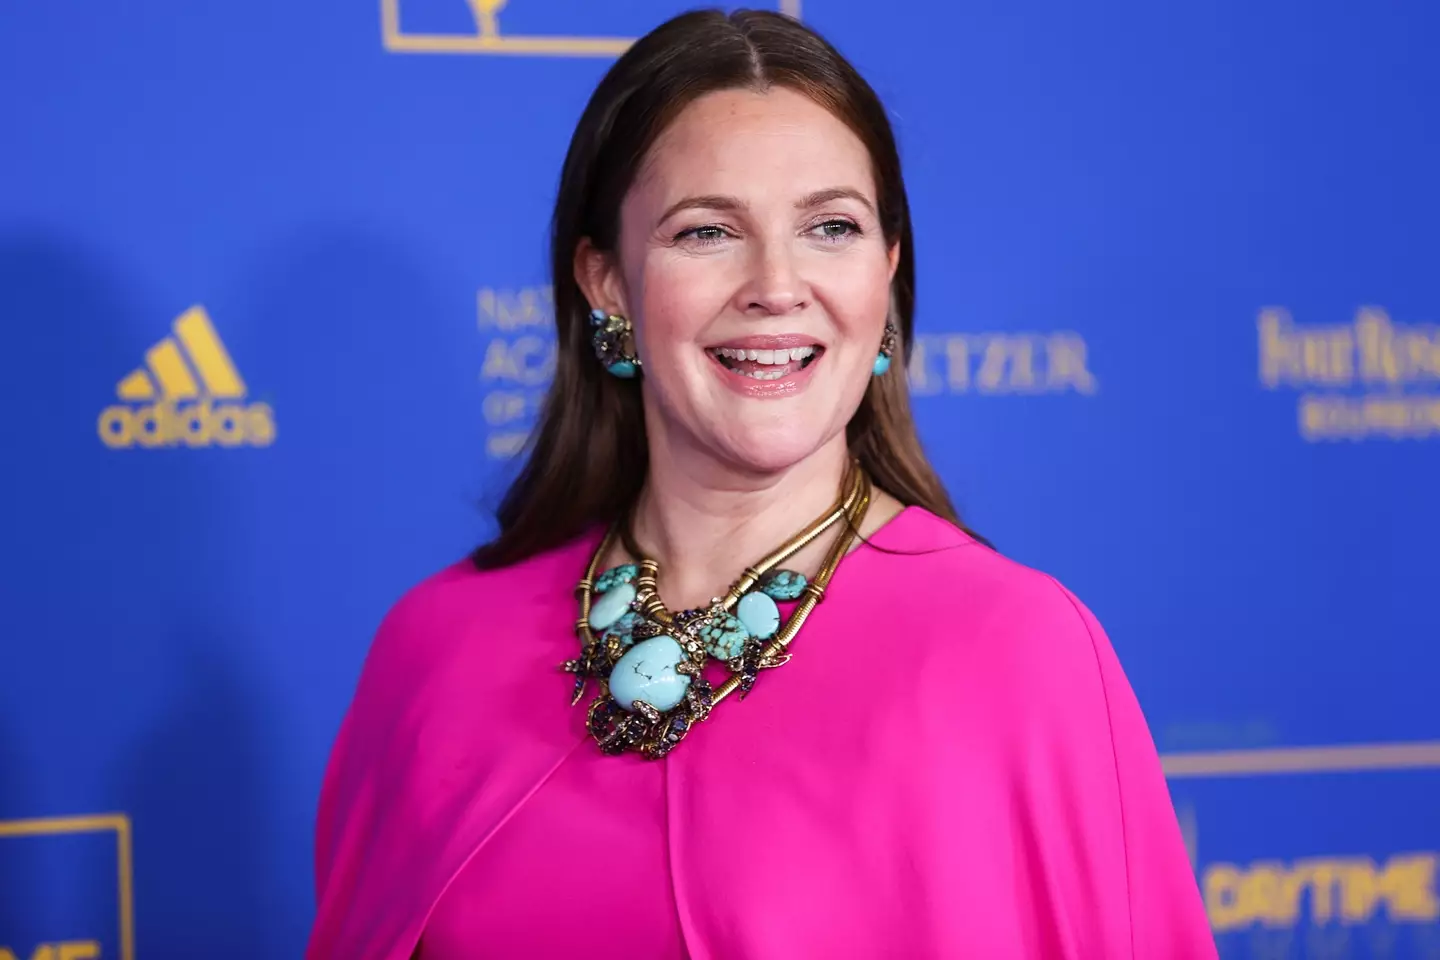 Drew Barrymore said that she can go 'years' without sex.